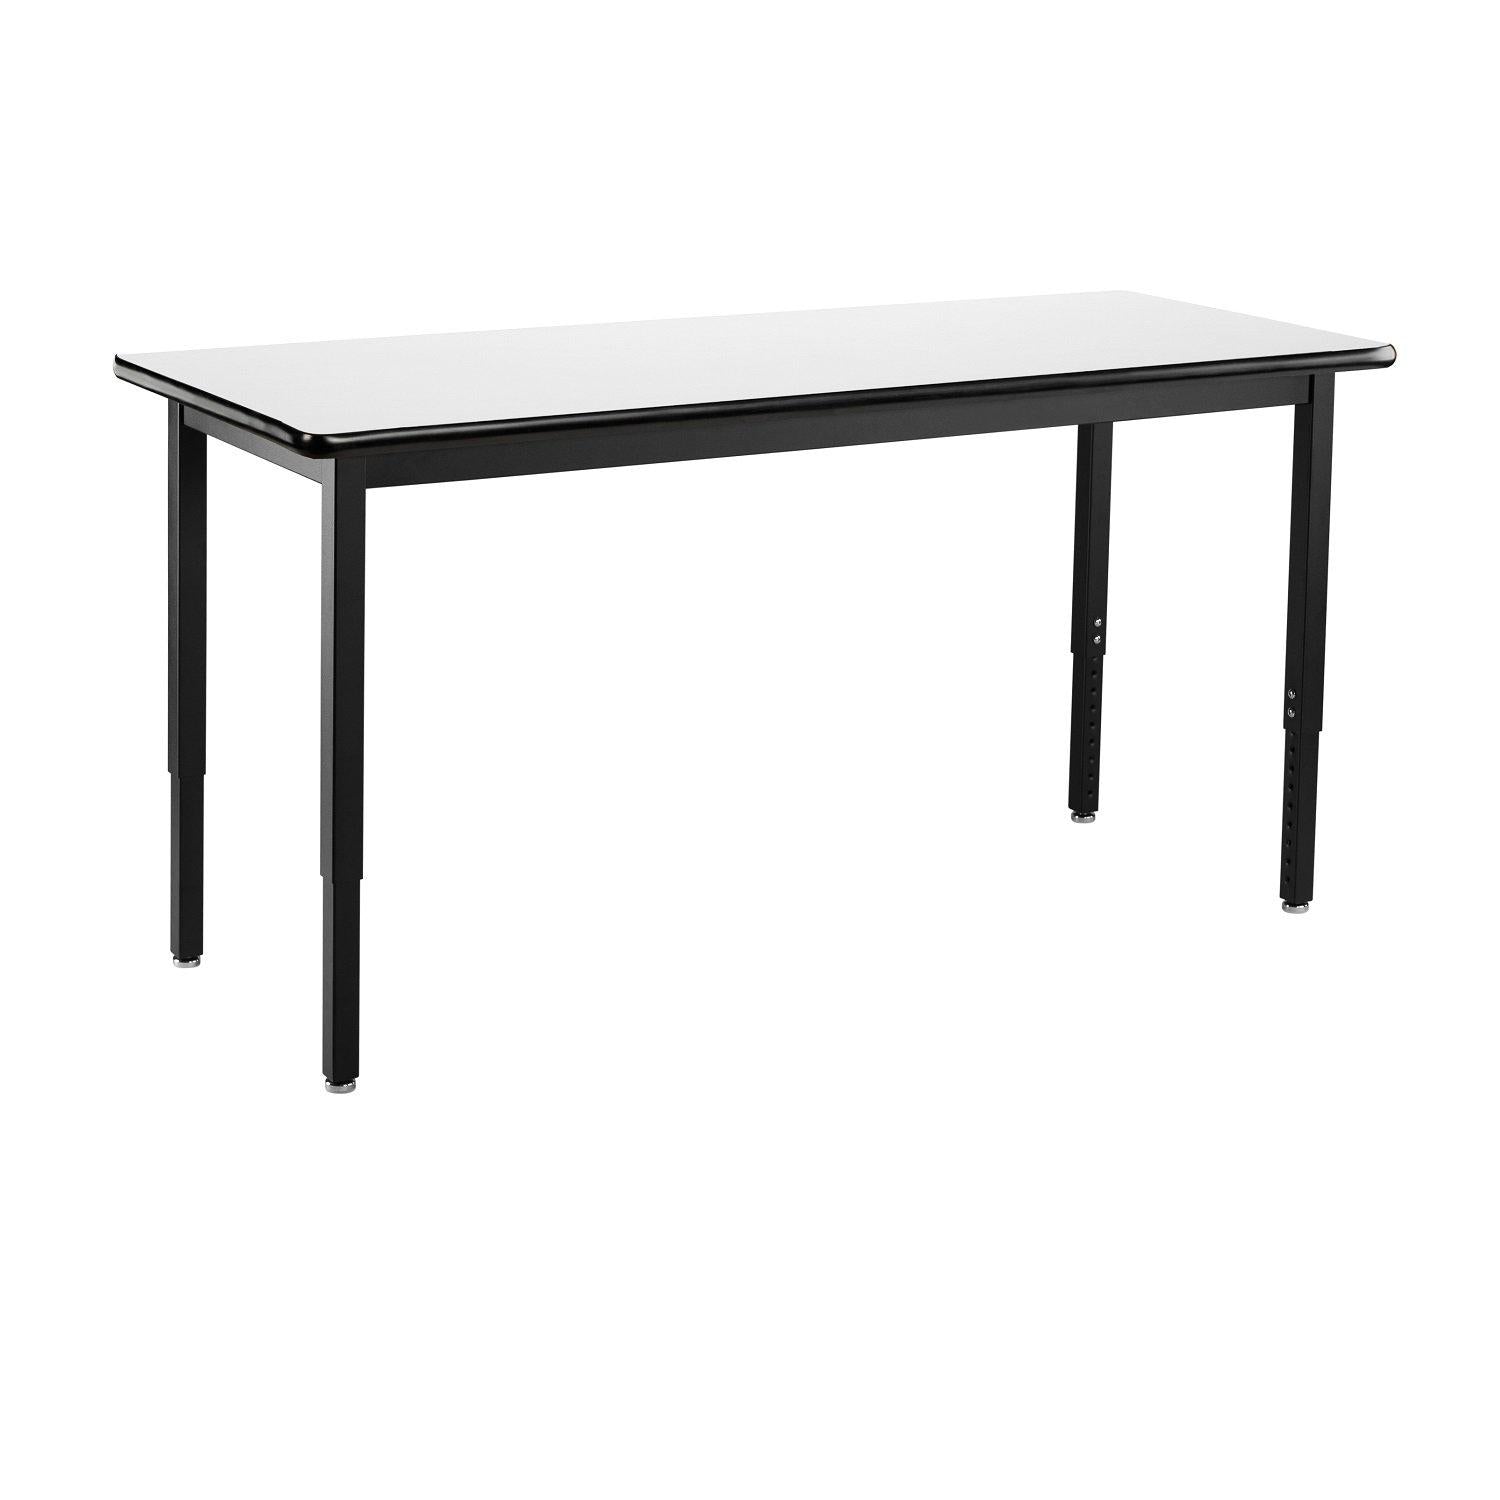 Heavy-Duty Height-Adjustable Utility Table, Black Frame, 24" x 54", Whiteboard High-Pressure Laminate Top